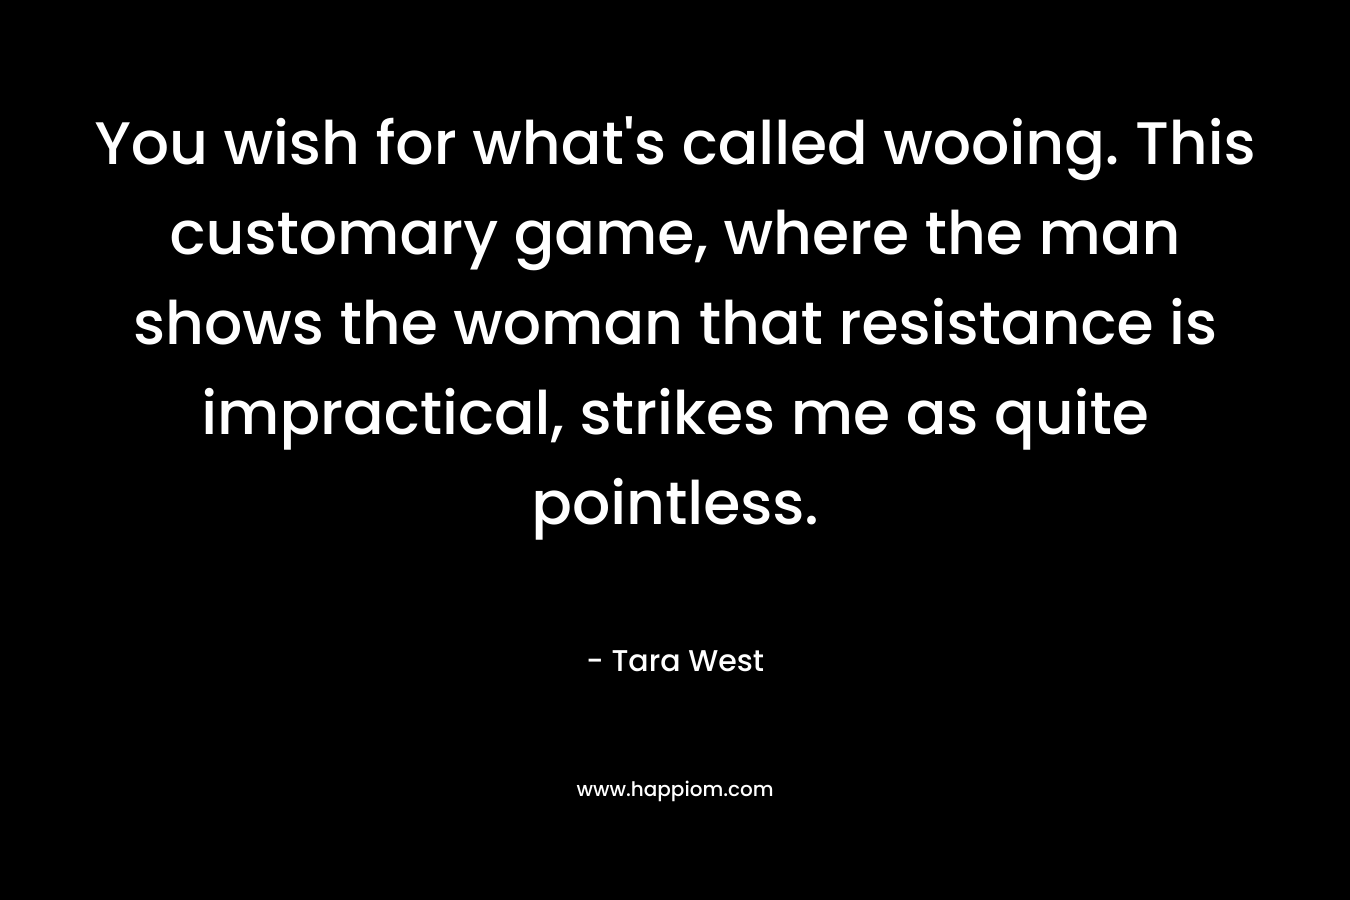 You wish for what’s called wooing. This customary game, where the man shows the woman that resistance is impractical, strikes me as quite pointless. – Tara West